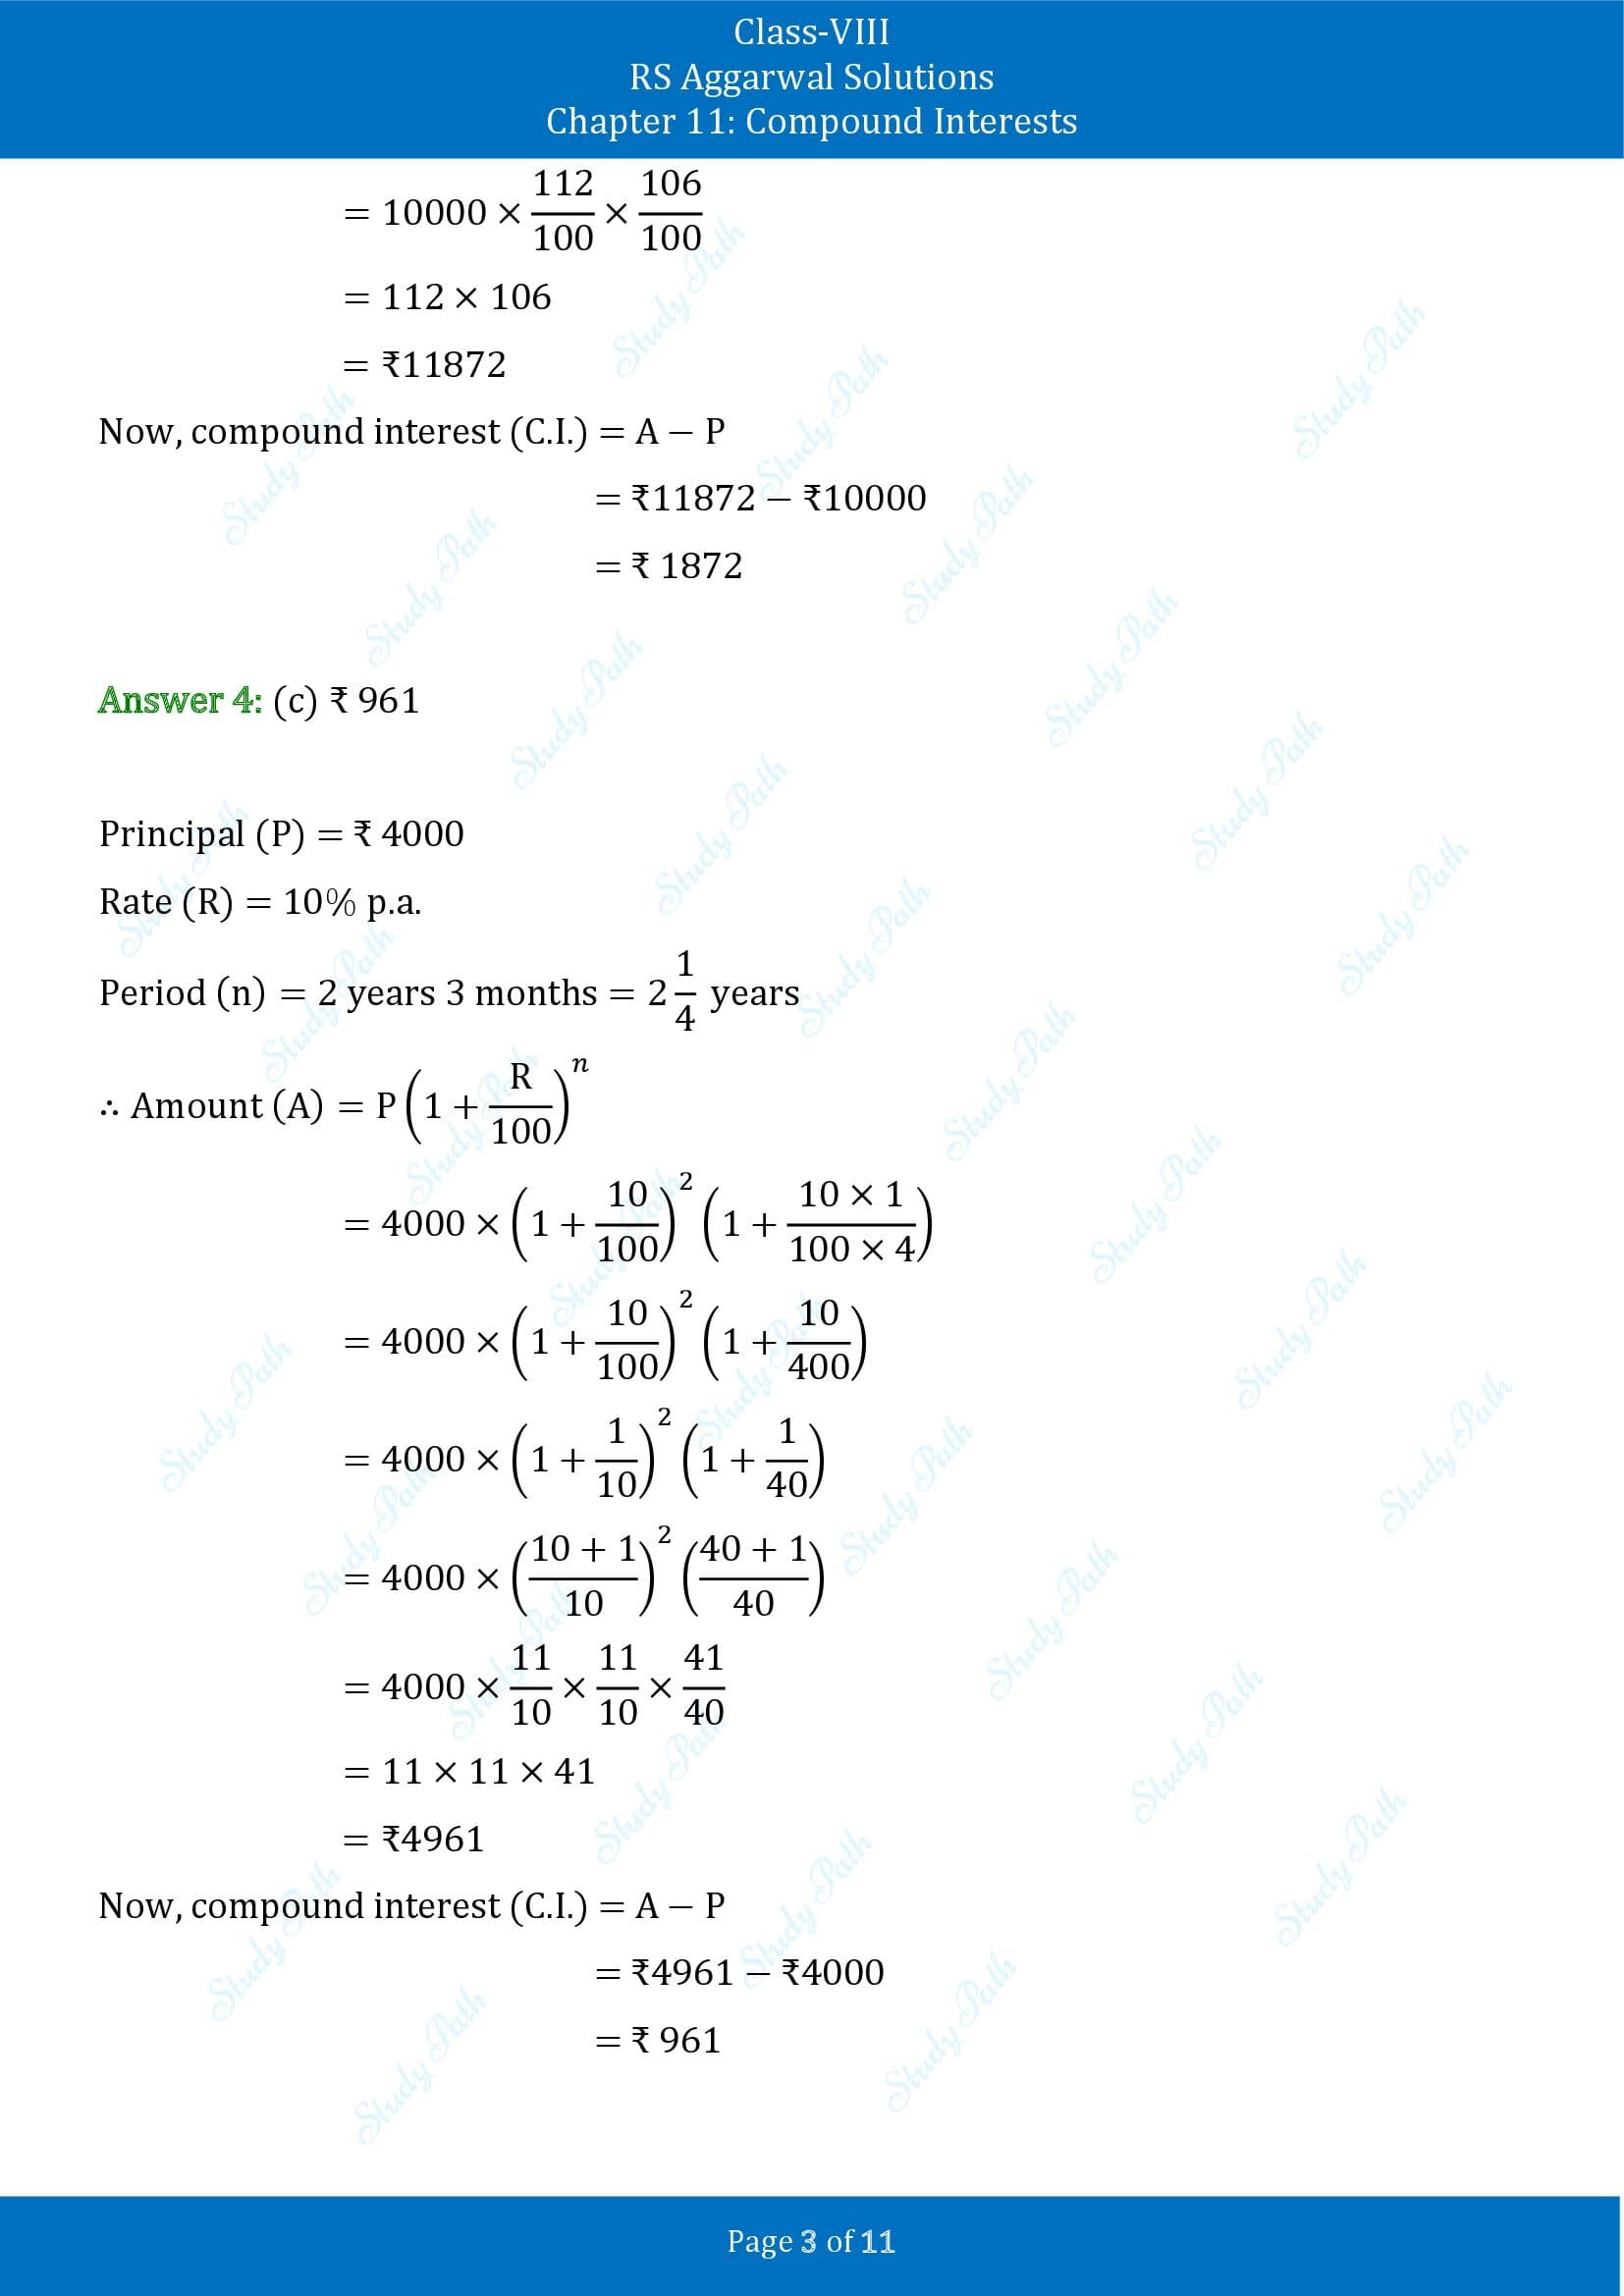 RS Aggarwal Solutions Class 8 Chapter 11 Compound Interests Exercise 11D MCQs 00003